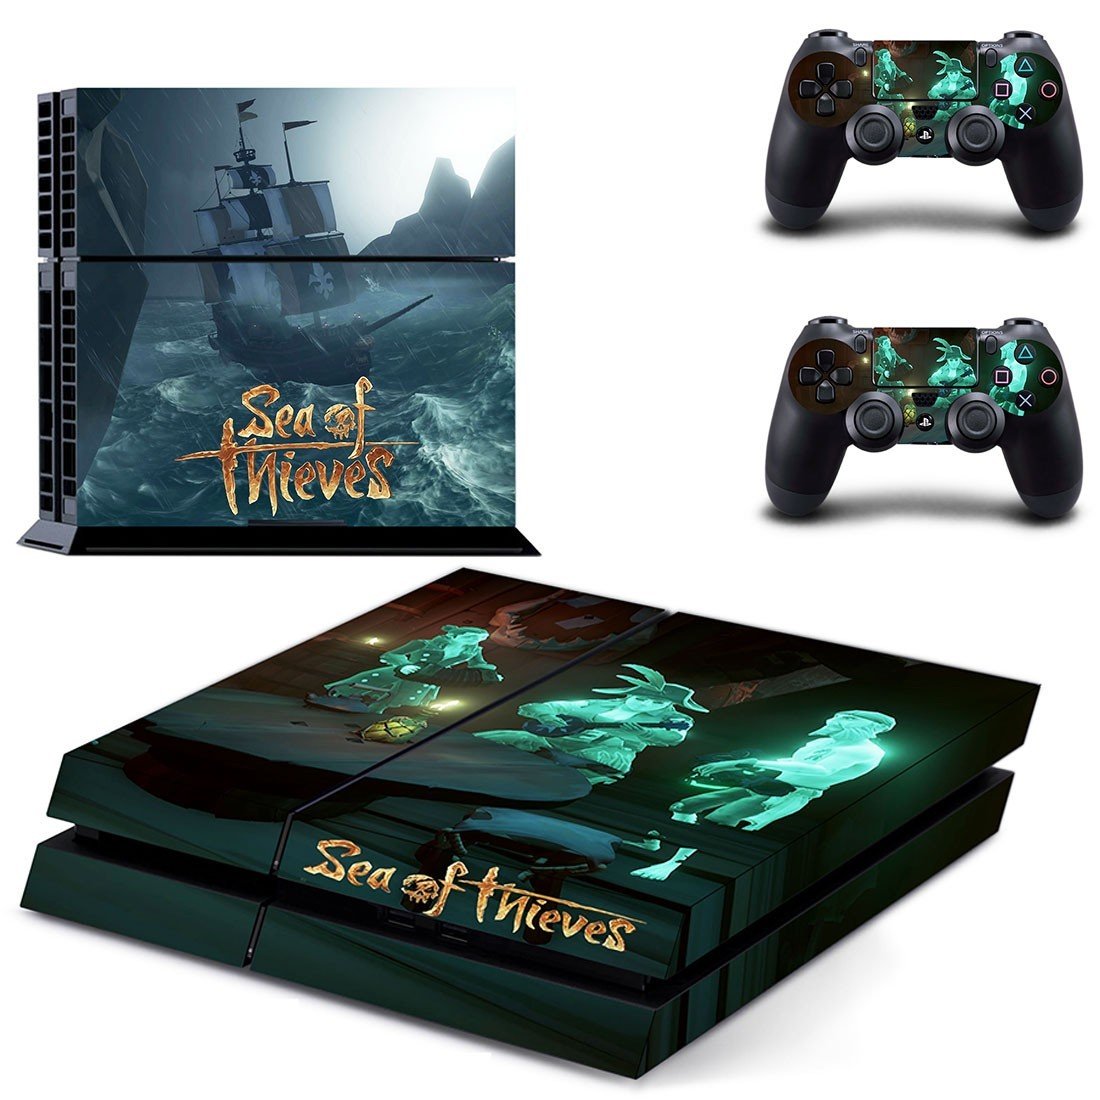 Sea of thieves ps4